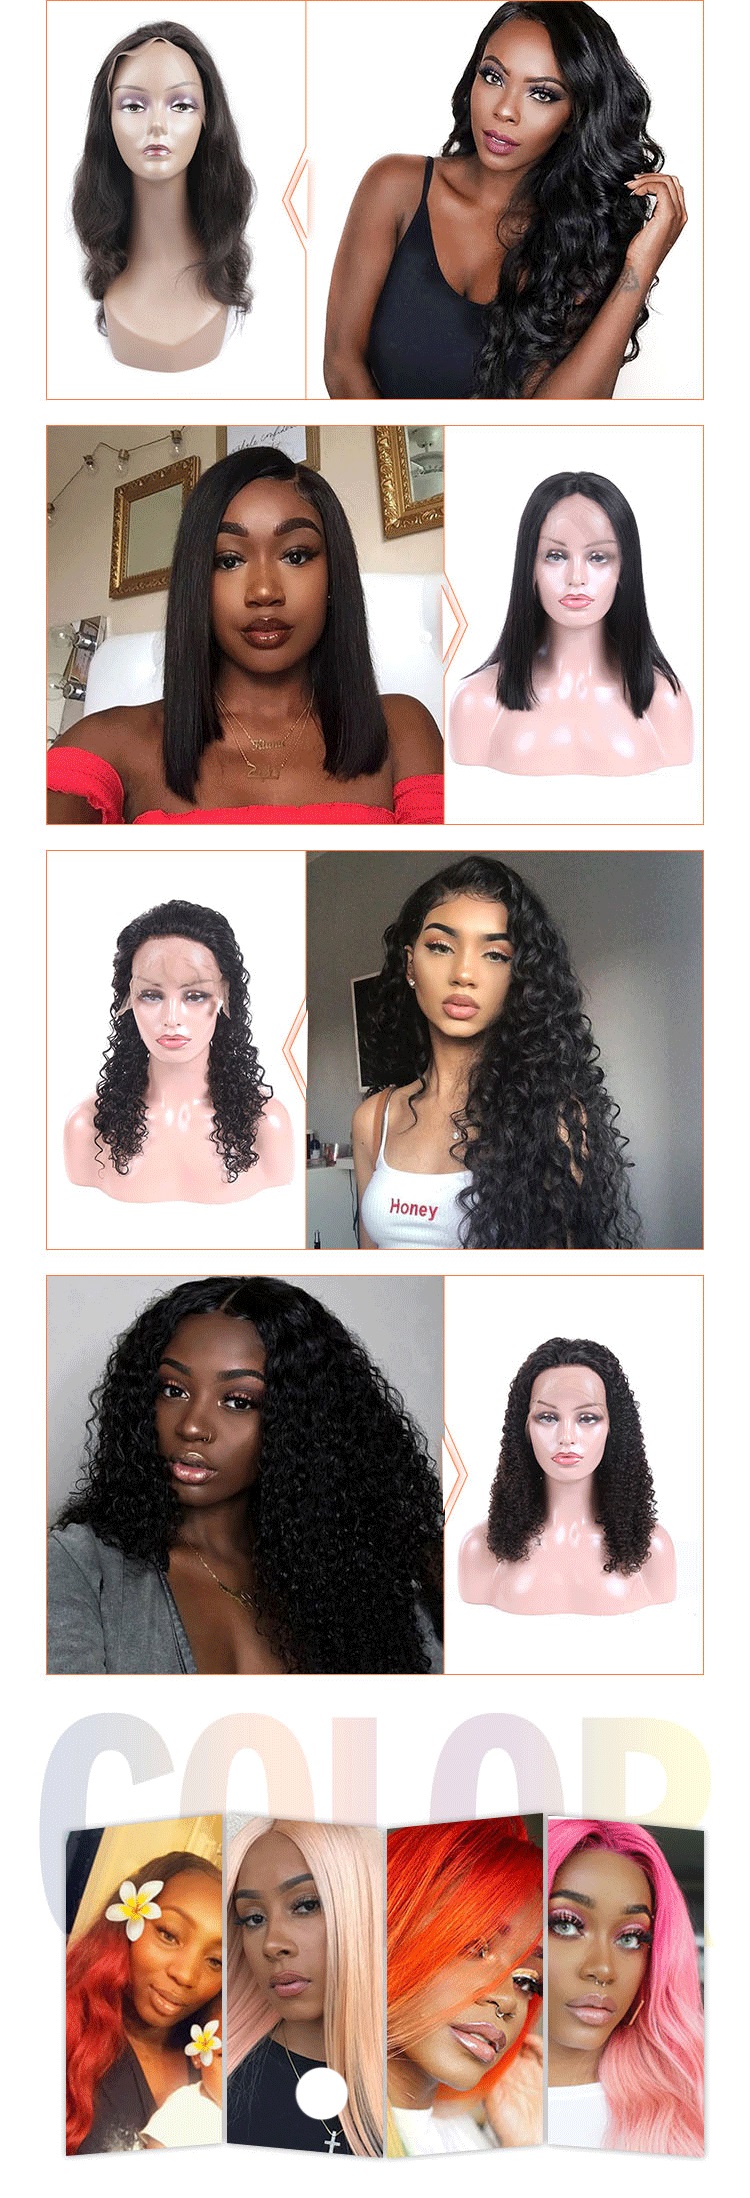 New arrival 100 percent brazilian human hair wigs,water wave full lace wig, virgin remy human hair wig